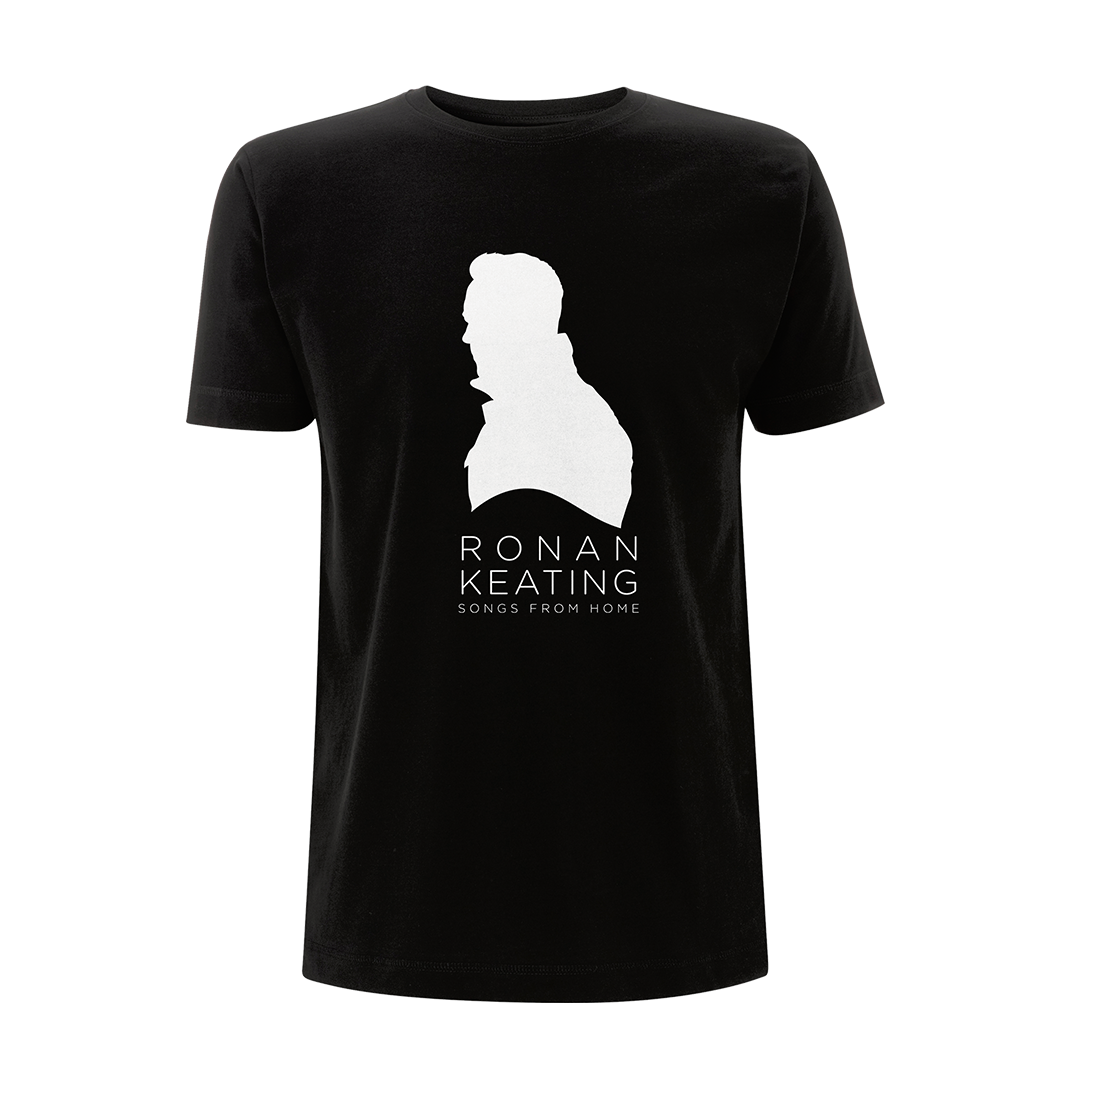 Ronan Keating - Songs From Home Silhouette Black T-Shirt